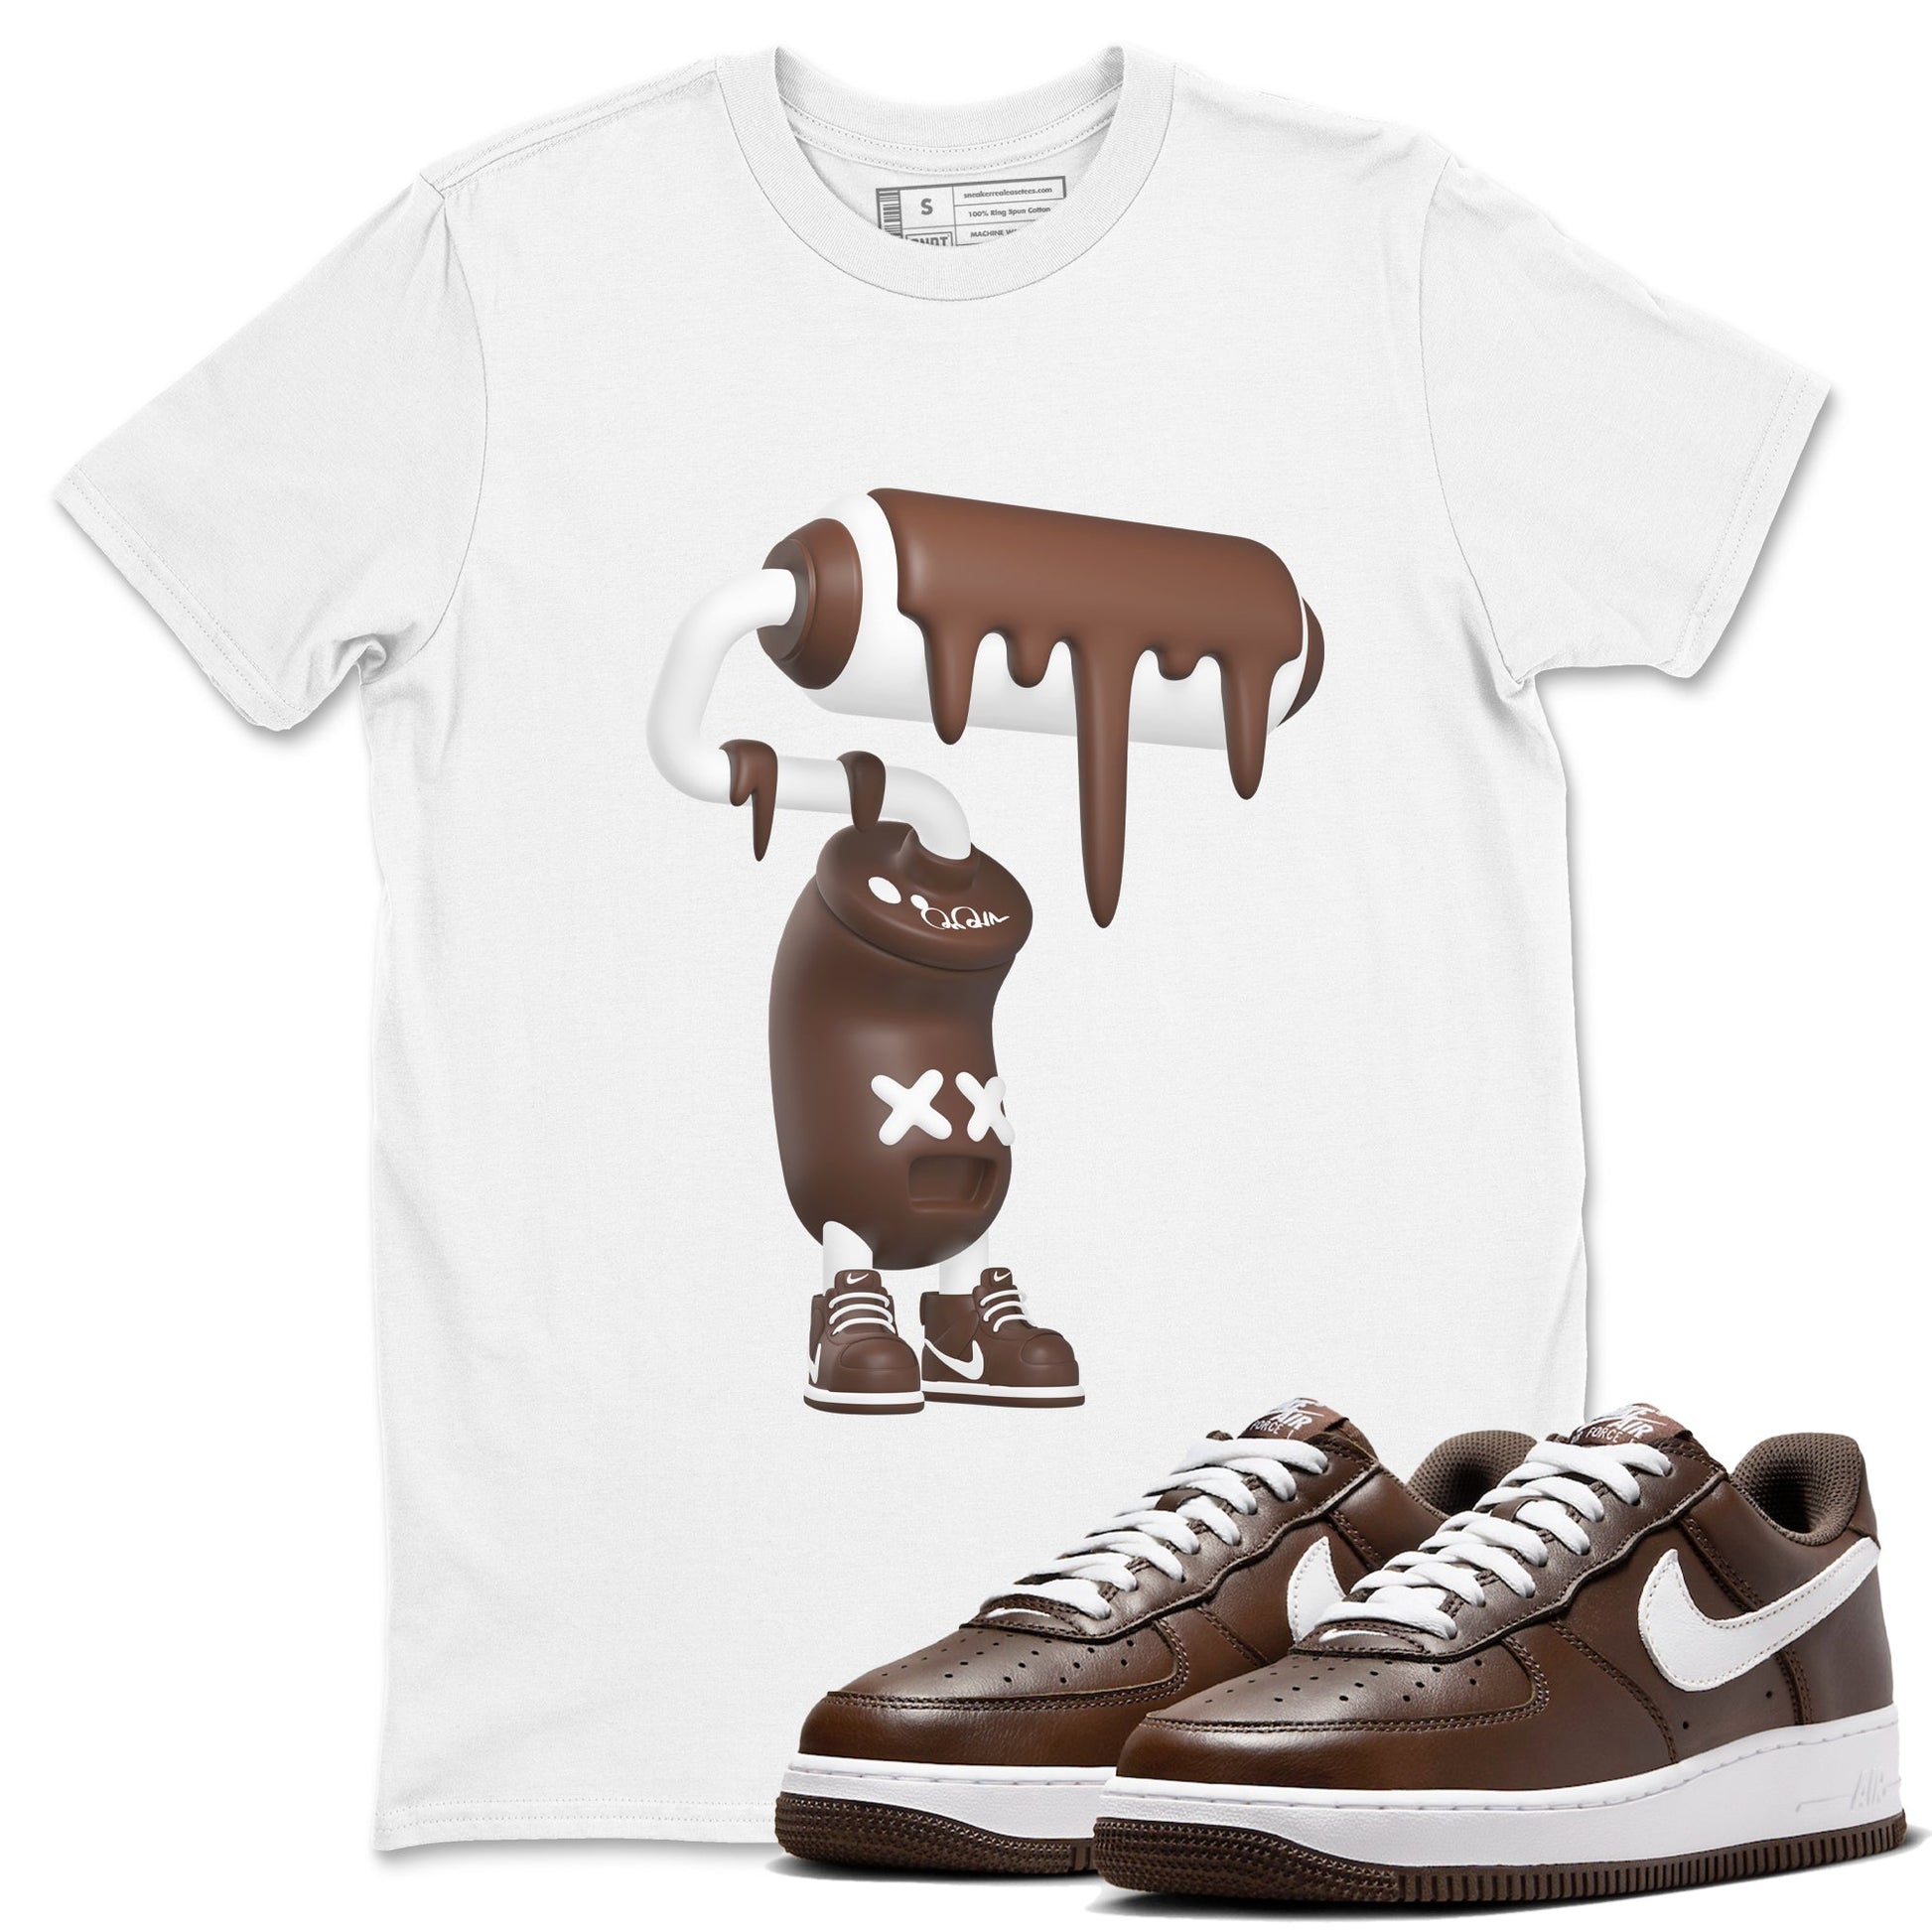 Air Force Low Chocolate shirt to match jordans 3D Paint Roller sneaker tees chocolate Nike Air Force Low Chocolate SNRT Sneaker Release Tees Unisex White 1 T-Shirt